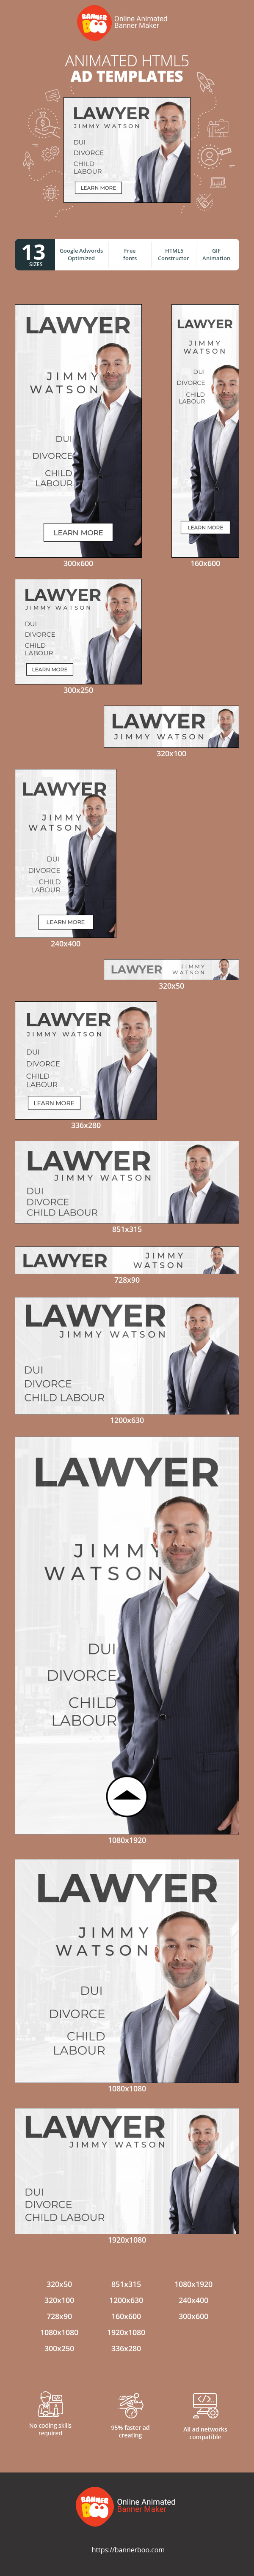 Banner ad template — Lawyer — Dui, Divorce, Child Labour